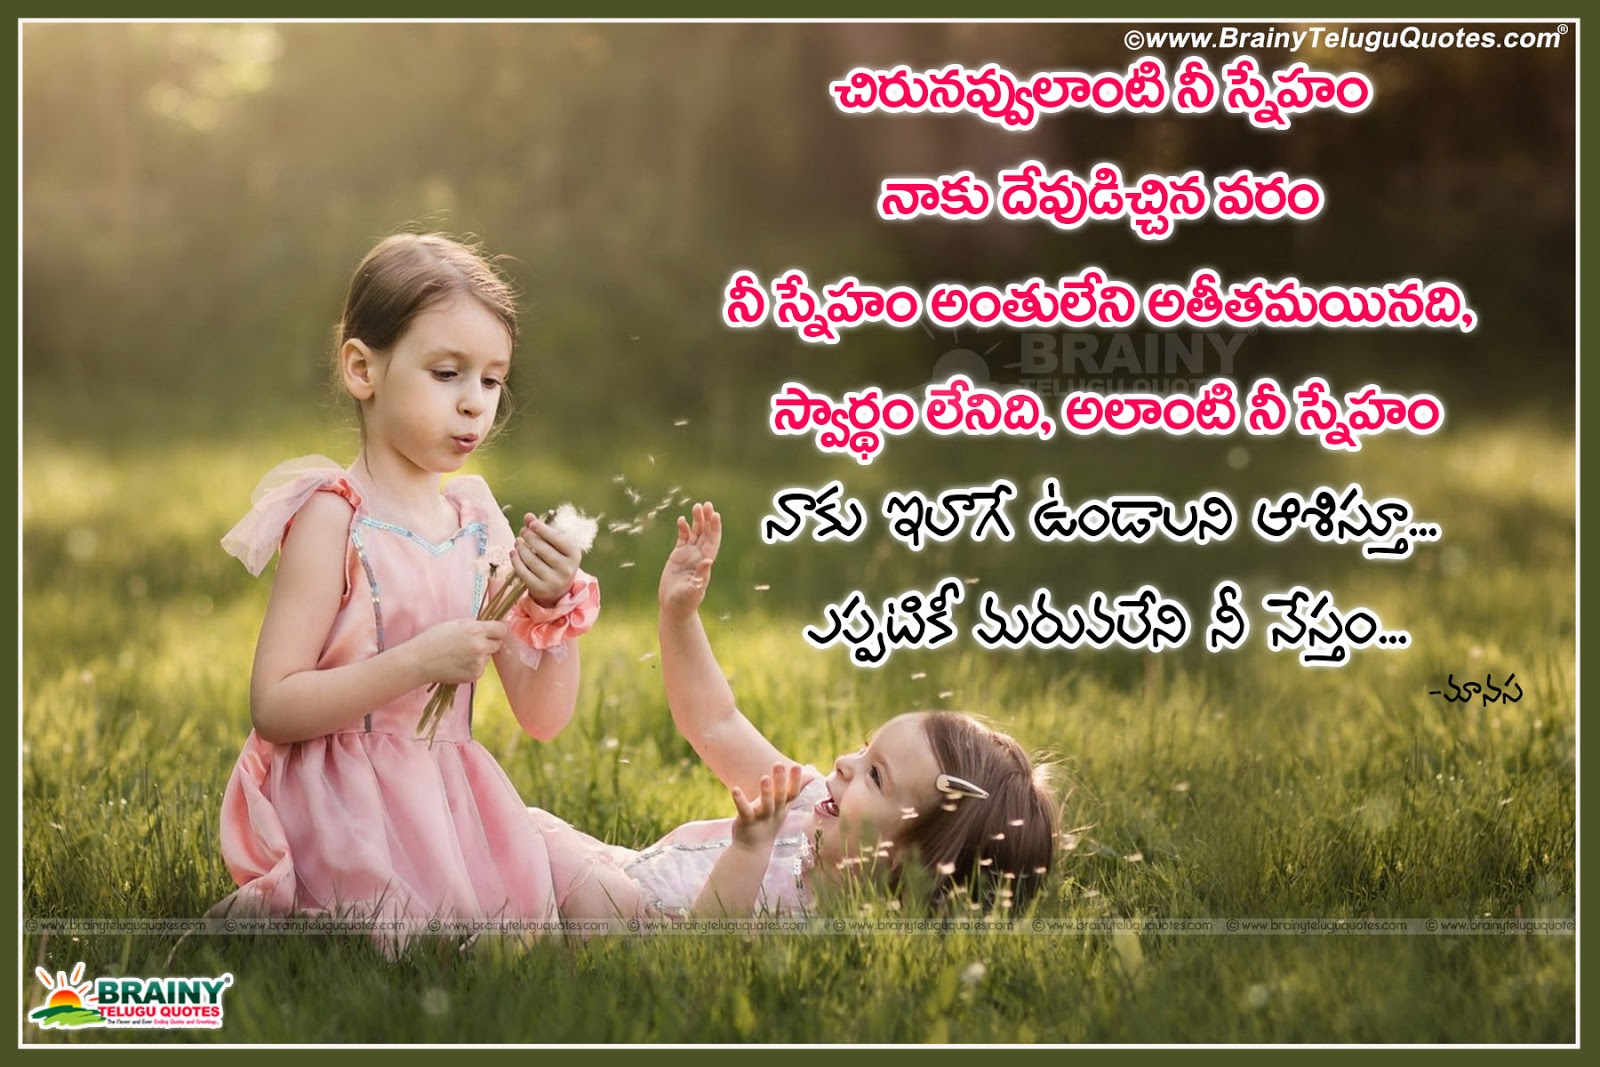 Special Telugu Quotations On Friends Whatsapp Sms Kavithalu Images